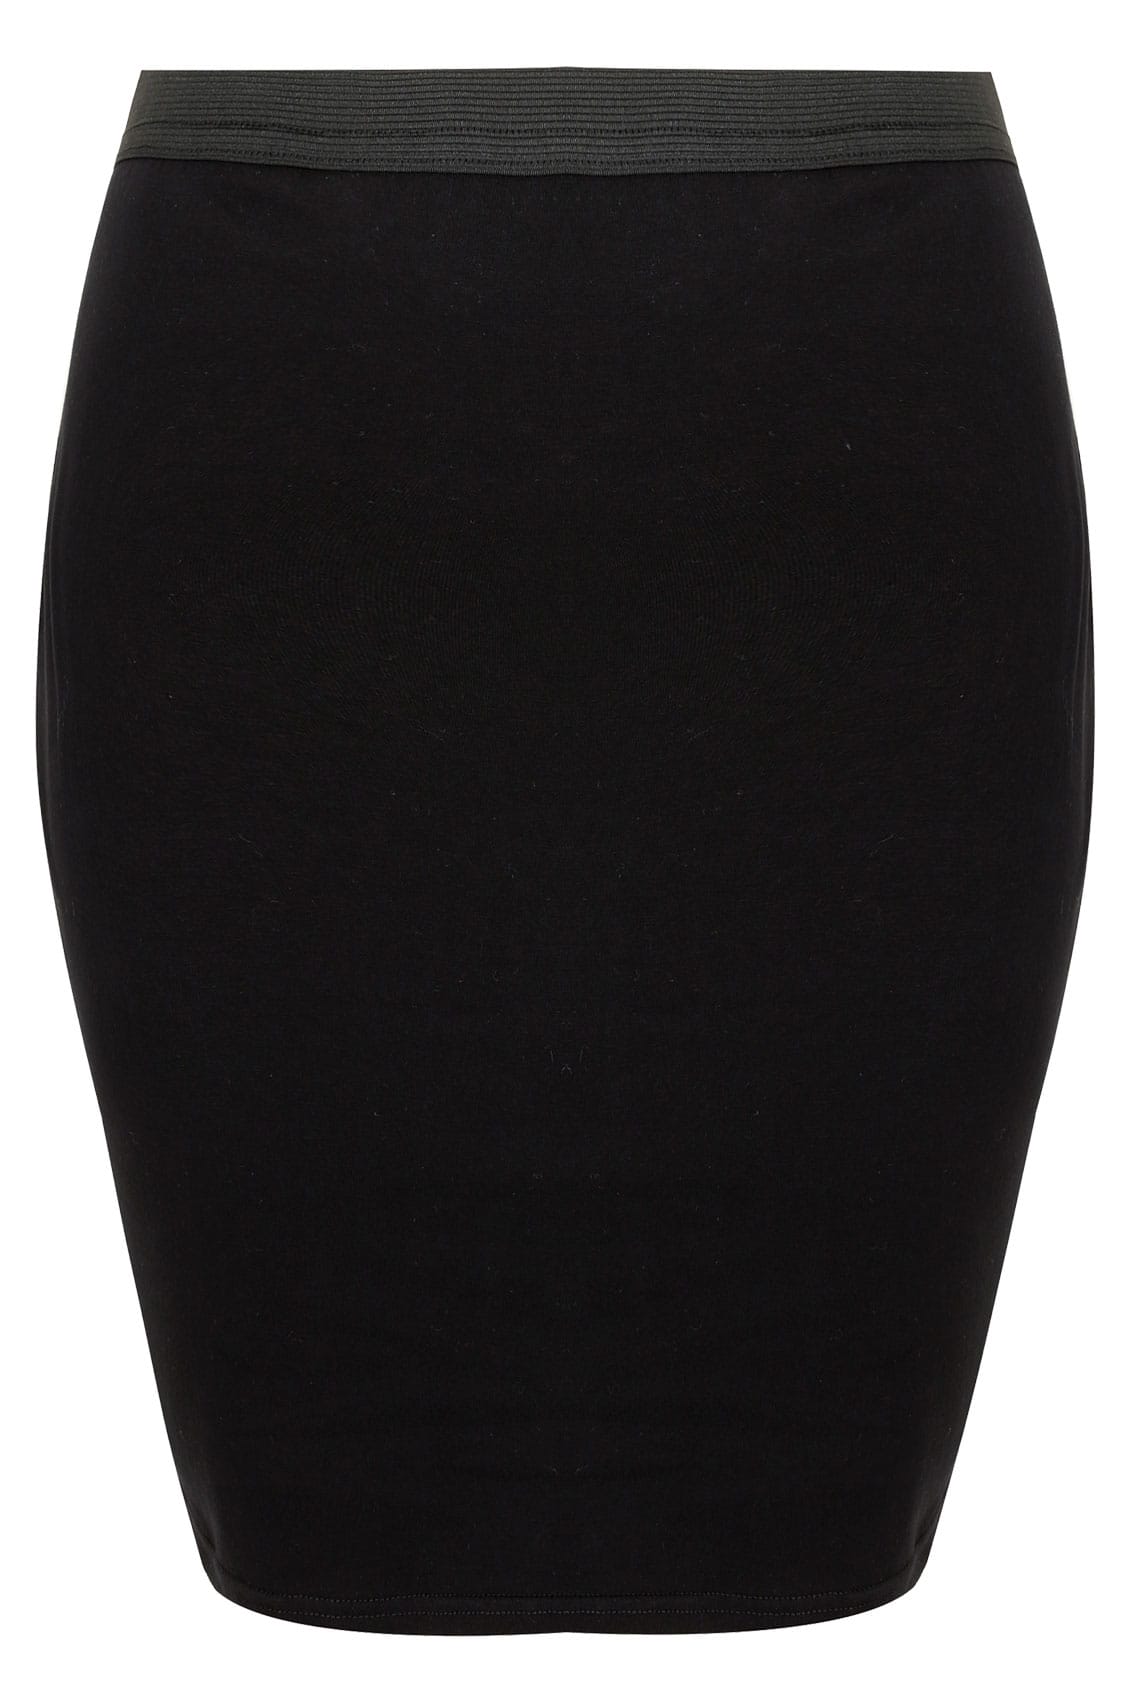 LIMITED COLLECTION Black Stretch Midi Skirt, Plus size 16 to 32